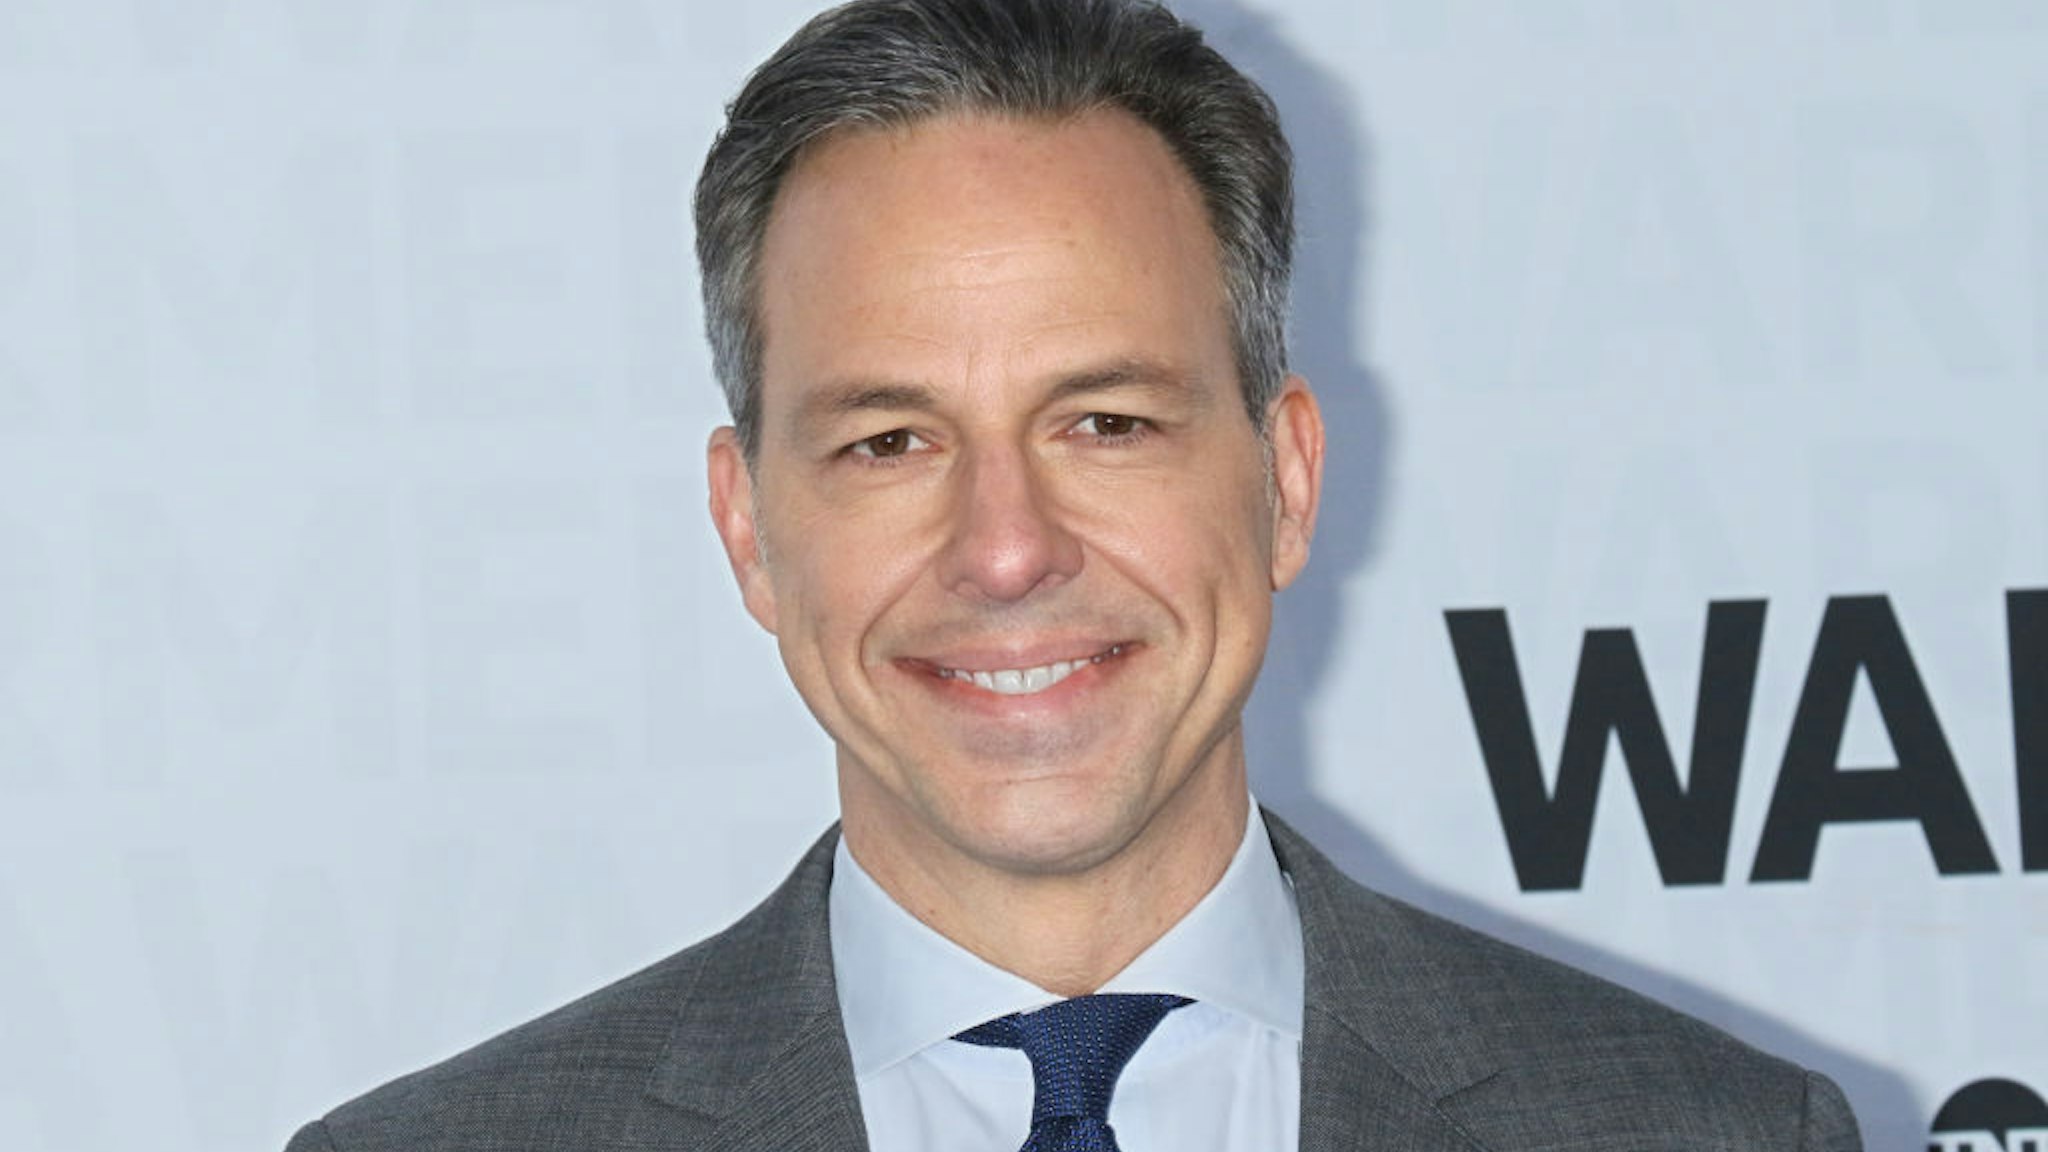 Journalist Jake Tapper attends the WarnerMedia 2019 Upfront at One Penn Plaza on May 15, 2019 in New York City.